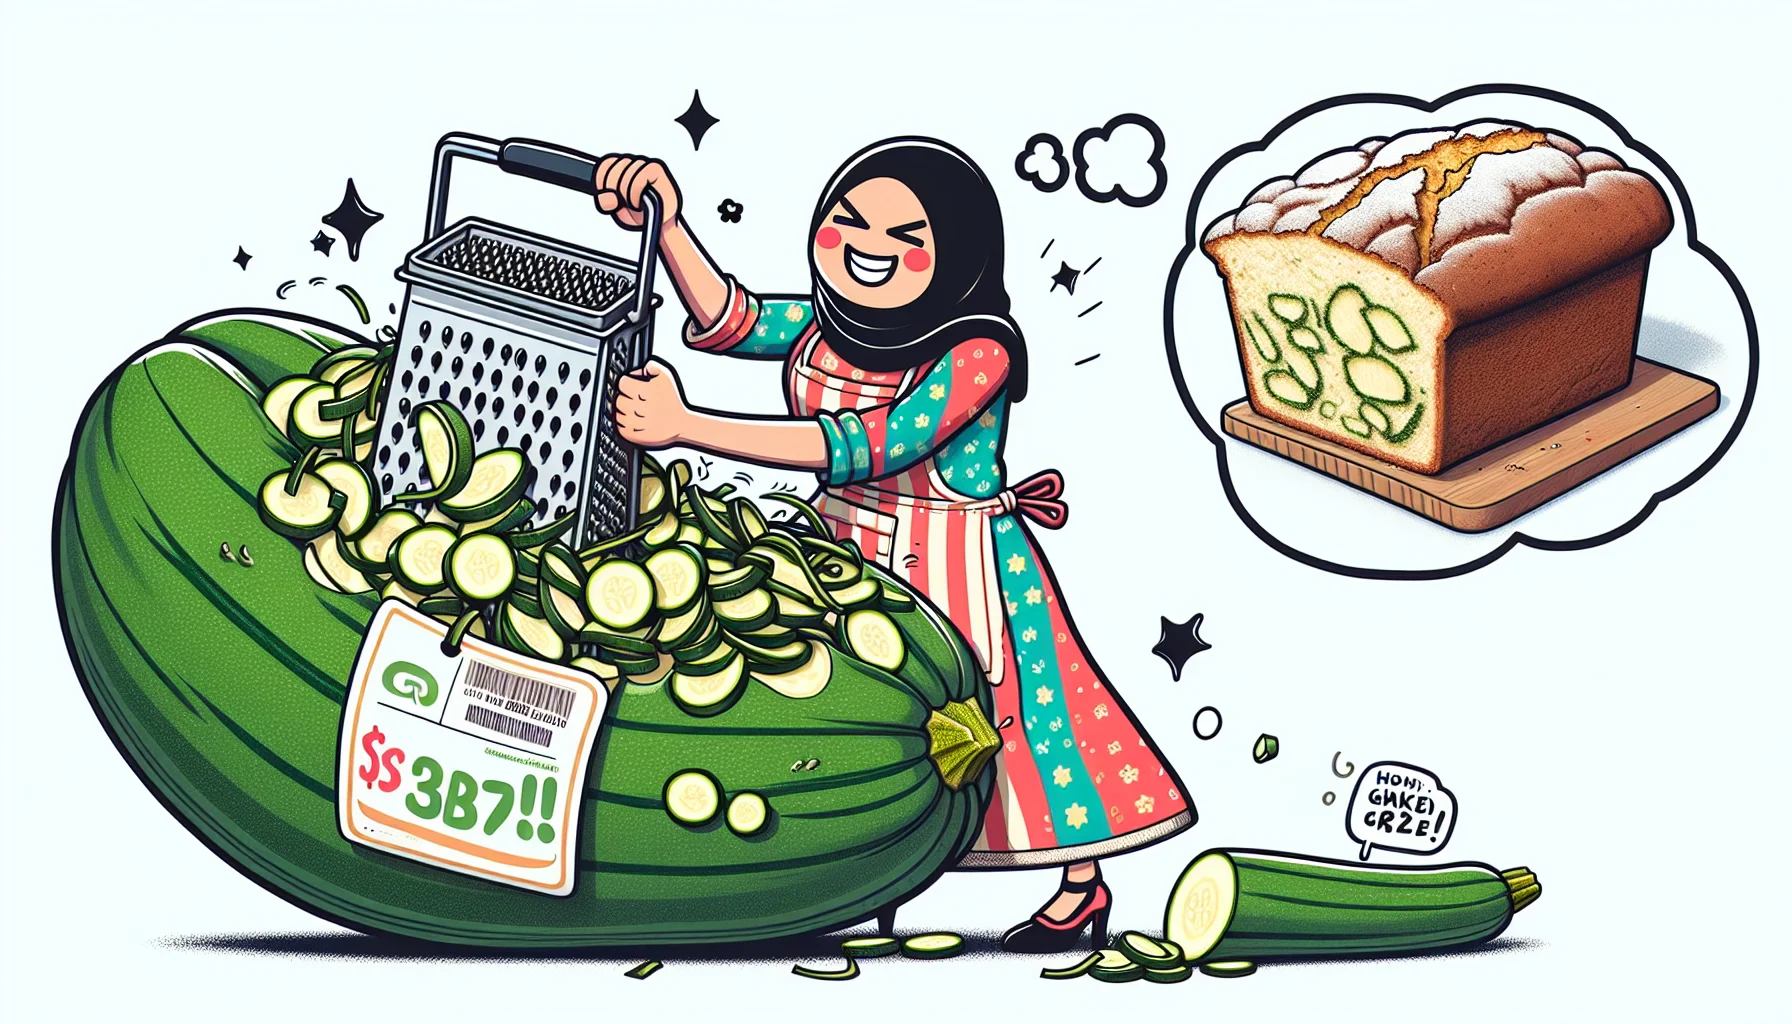 Create an image showing a humorous and engaging scene about how to shred zucchini for bread. In the scene there is a Middle-Eastern woman wearing a quirky apron, comically struggling to handle an oversized zucchini. Filling up every corner, the zucchini appears to fight back while she tries to shred it with a grater. A thought bubble pops out from her head, with an image of a mouthwatering loaf of zucchini bread along with a price tag, hinting the low cost of making it at home. This light-hearted picture tries to subtly encourage people to eat healthier with less money.